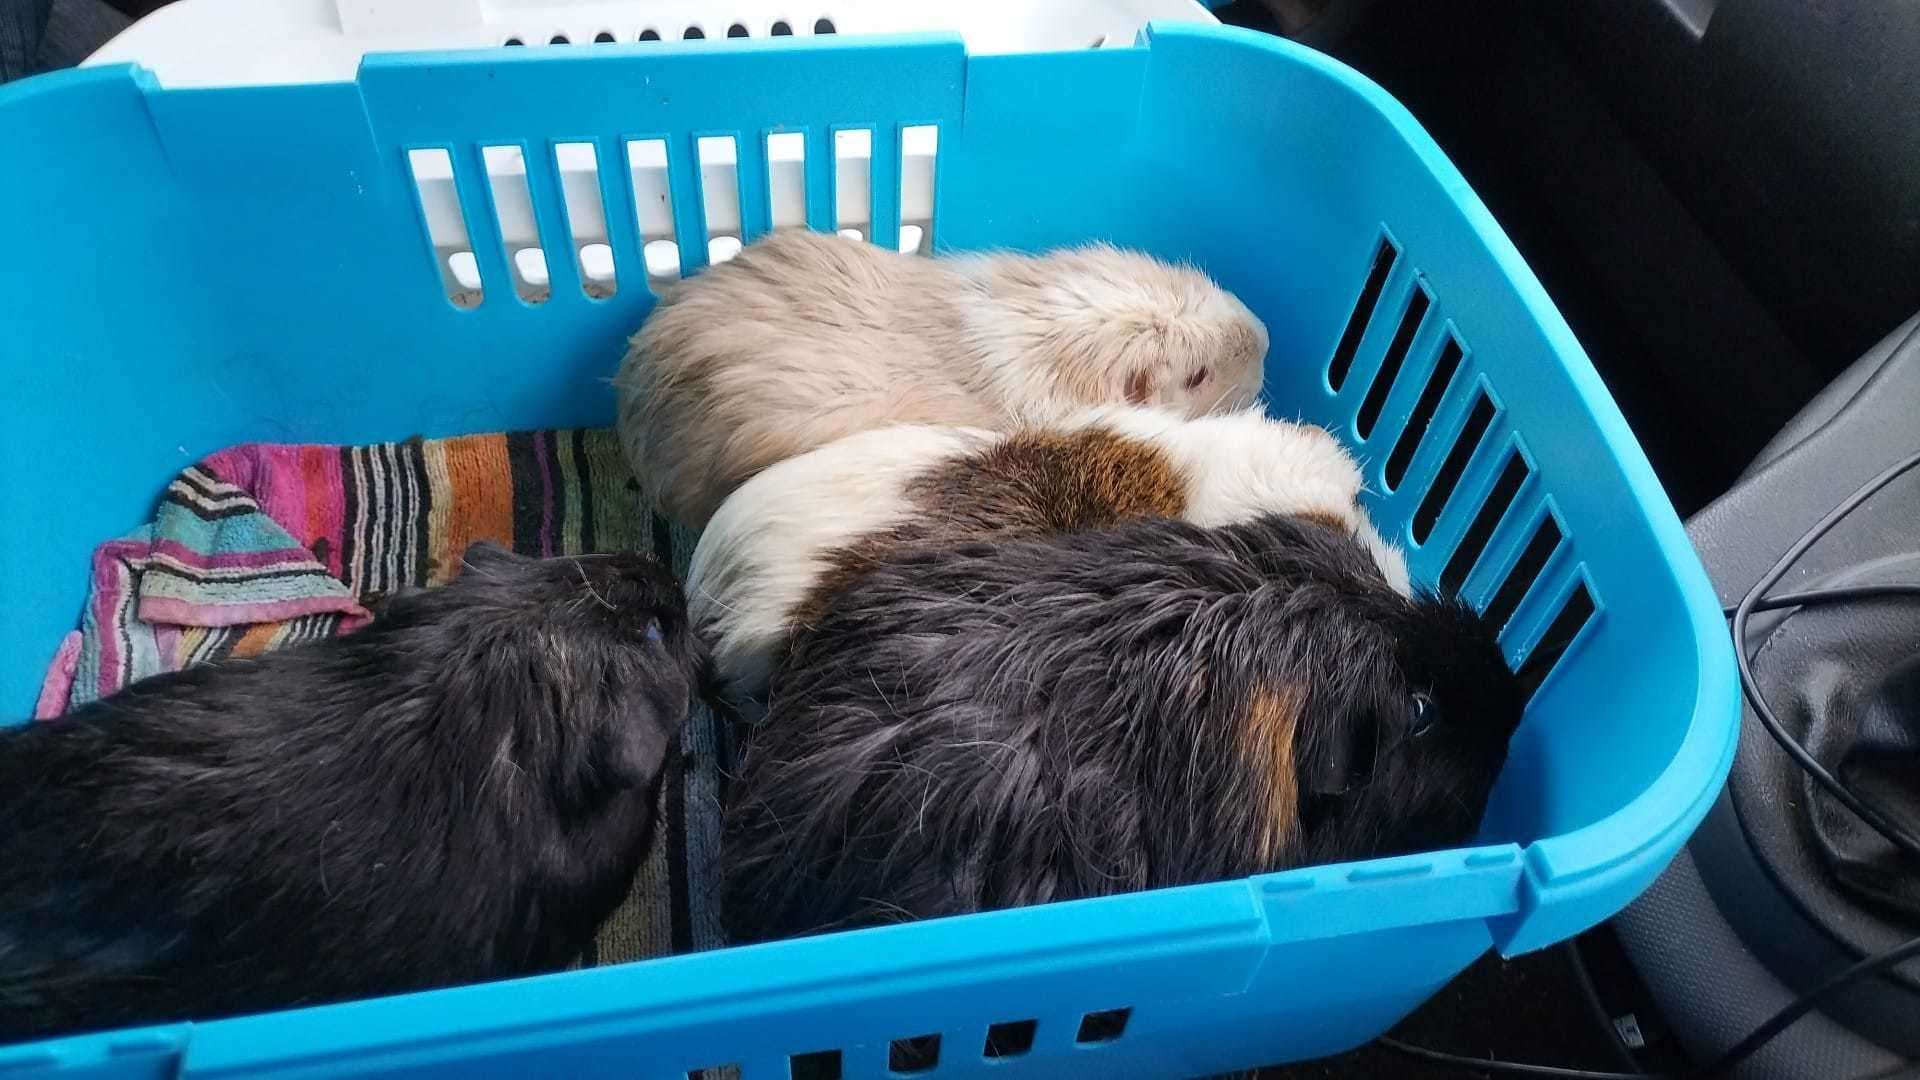 Four out of five of the guinea pigs have been found safe